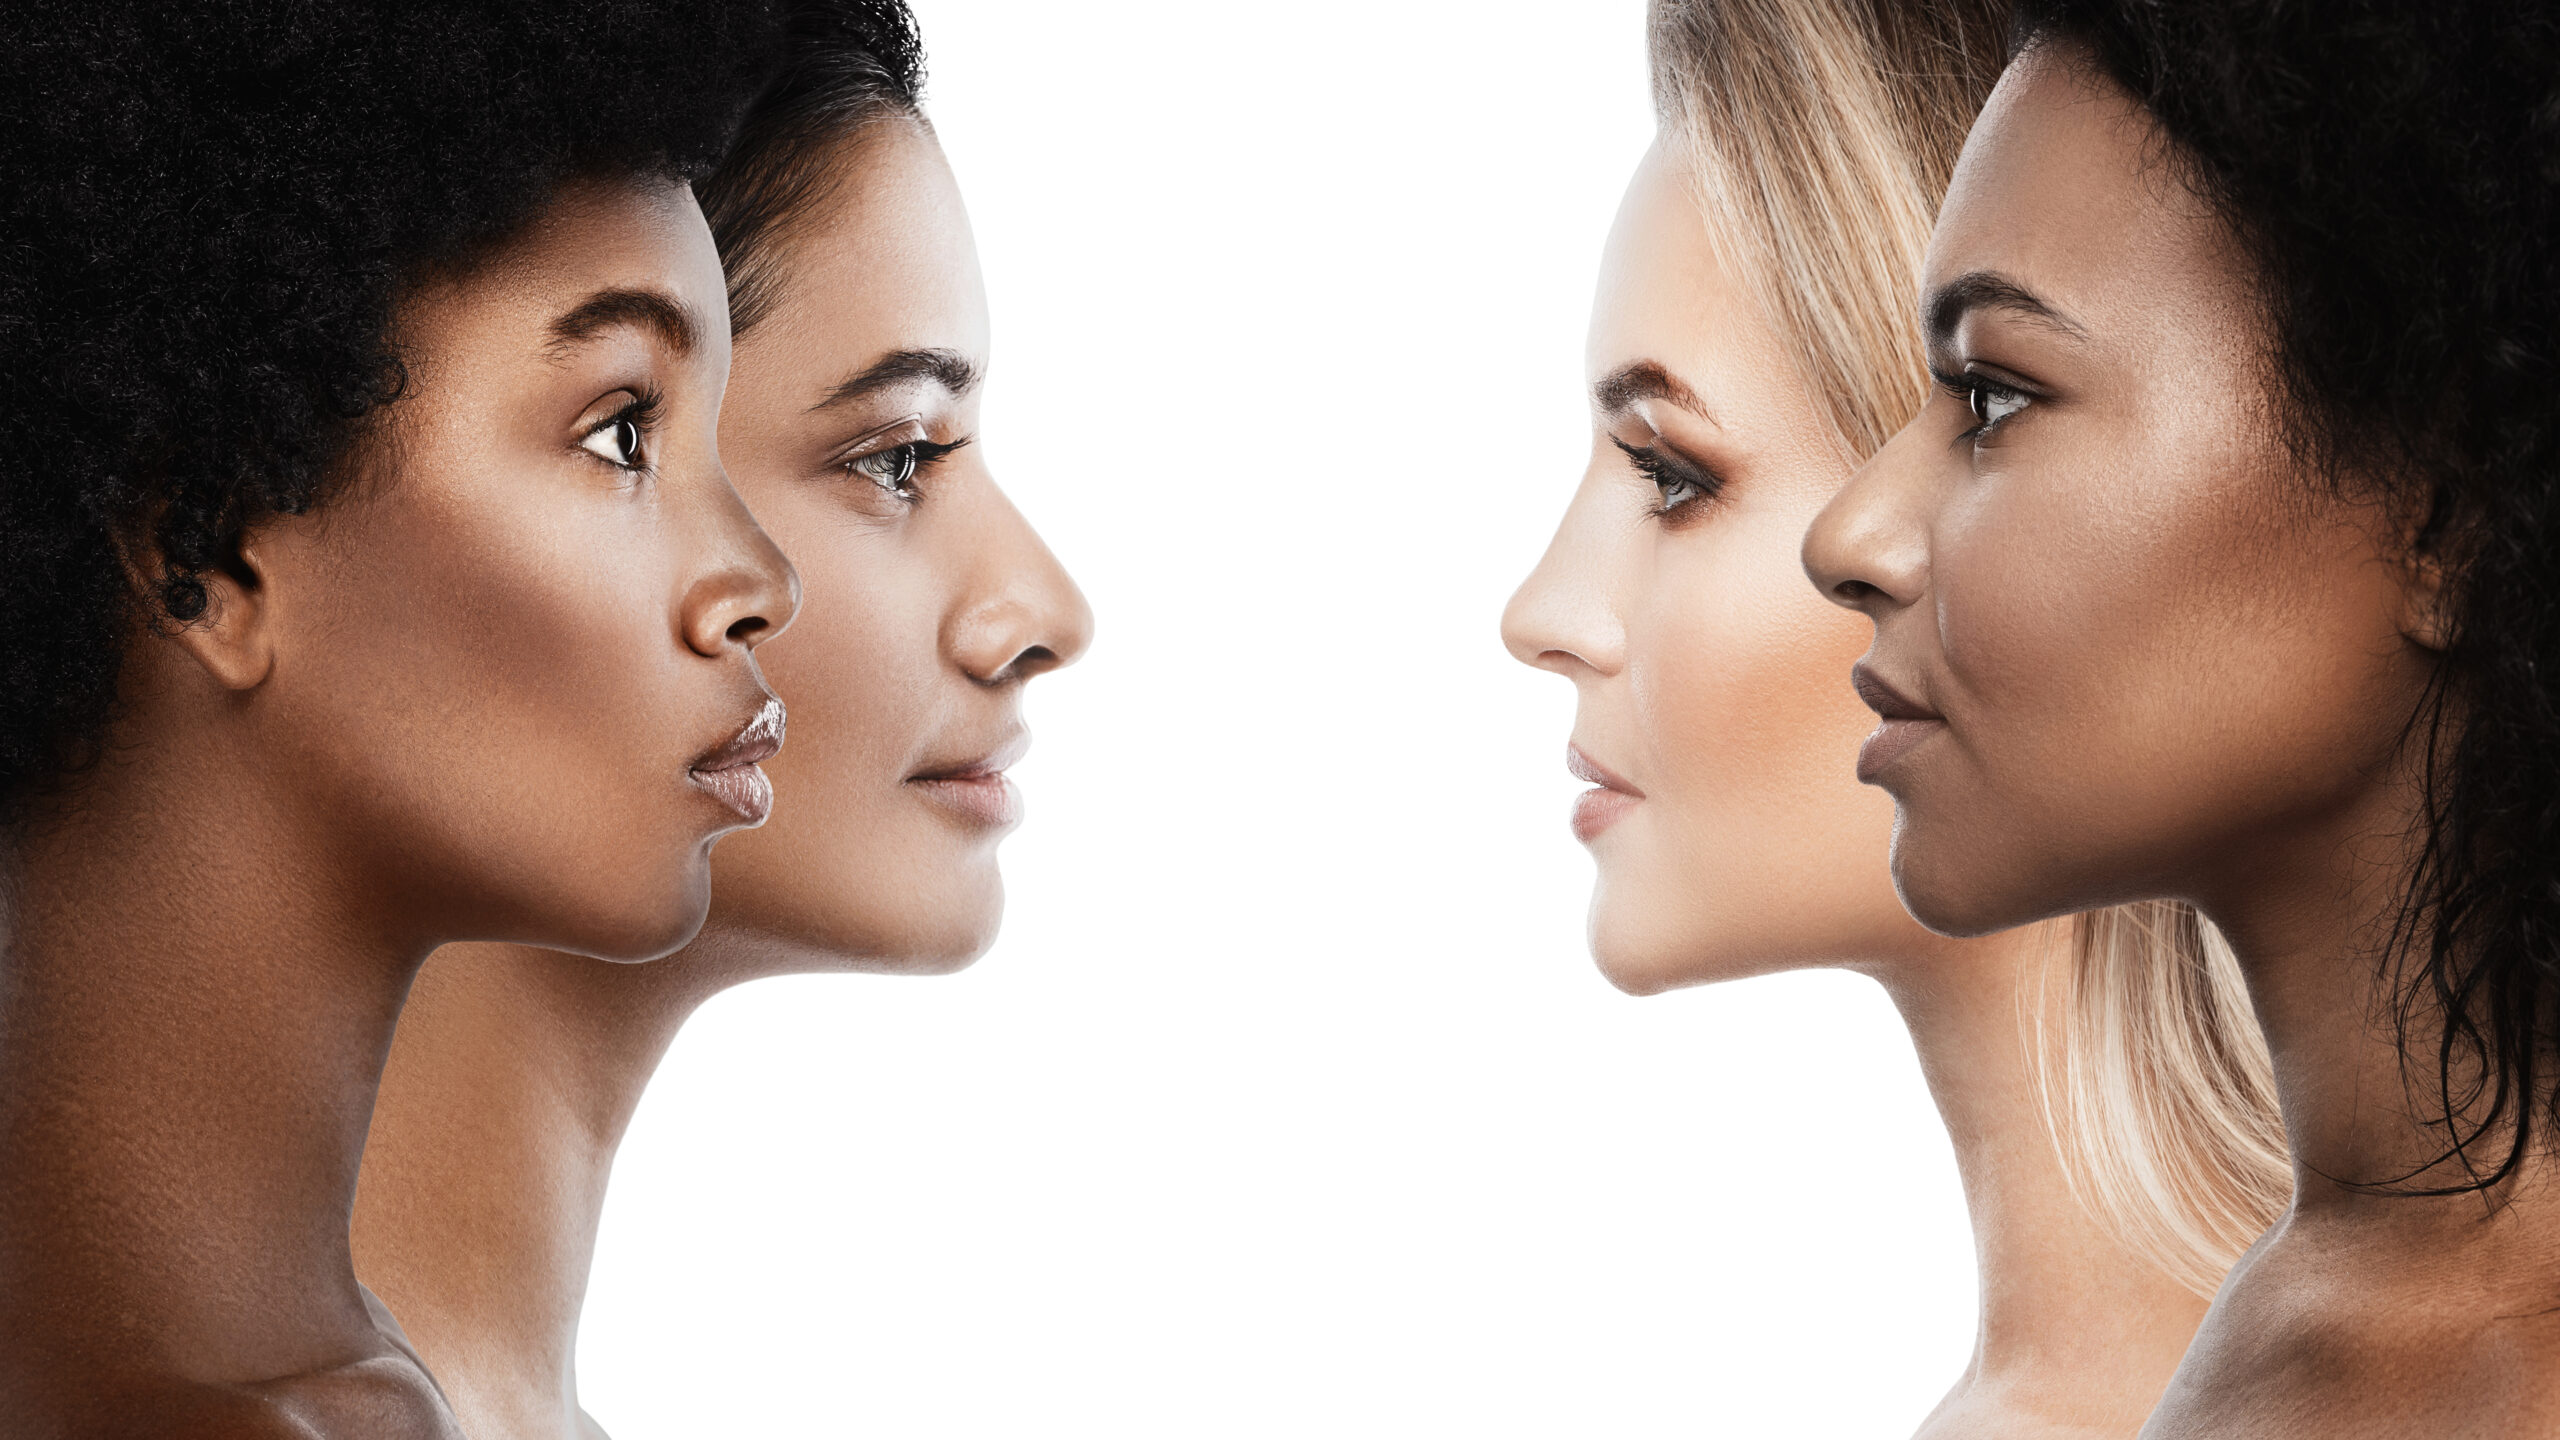 Multi-ethnic diversity and beauty. Group of different ethnicity women against a white background. Ethnic rhinoplasty